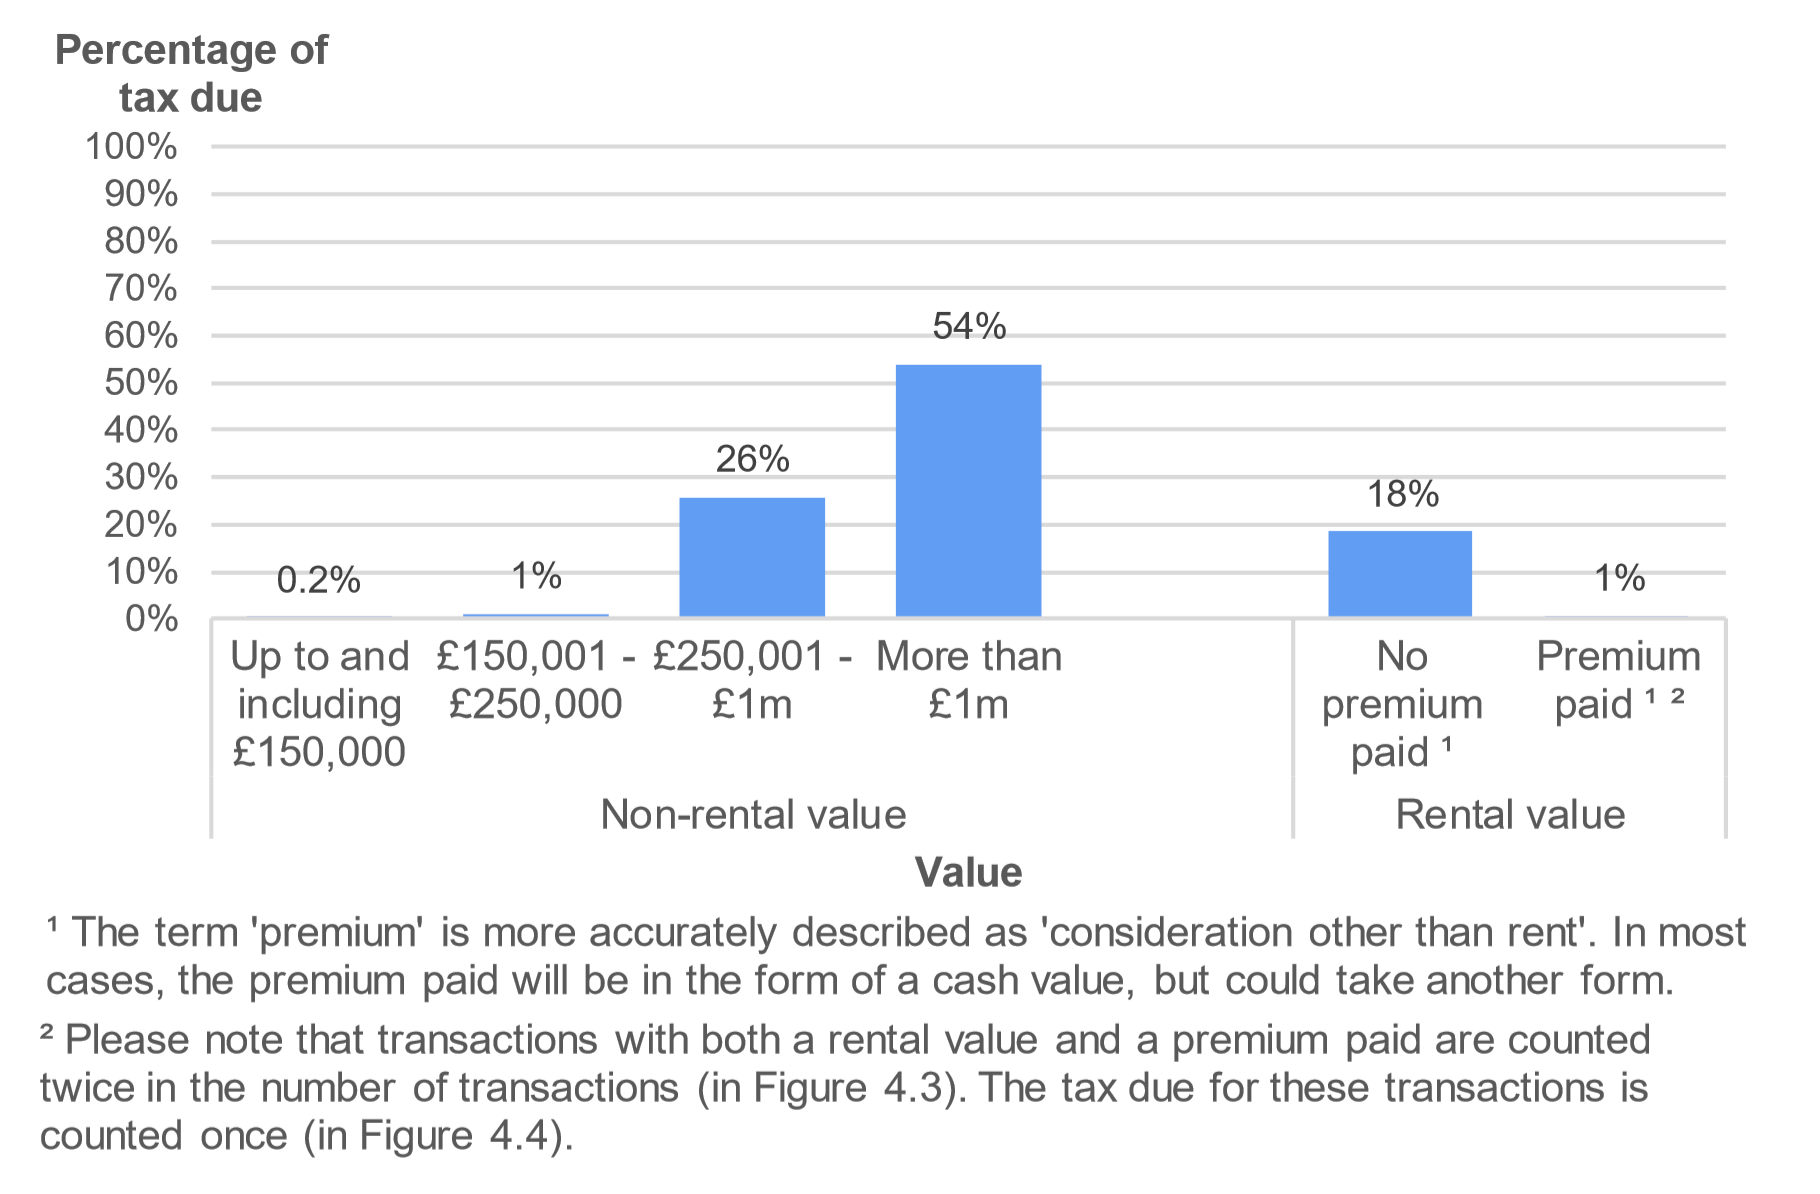 Figure 4.4 shows the amount of tax due on non-residential transactions, by value of the property. Data is presented as the percentage of transactions and relates to transactions effective in April to June 2019.